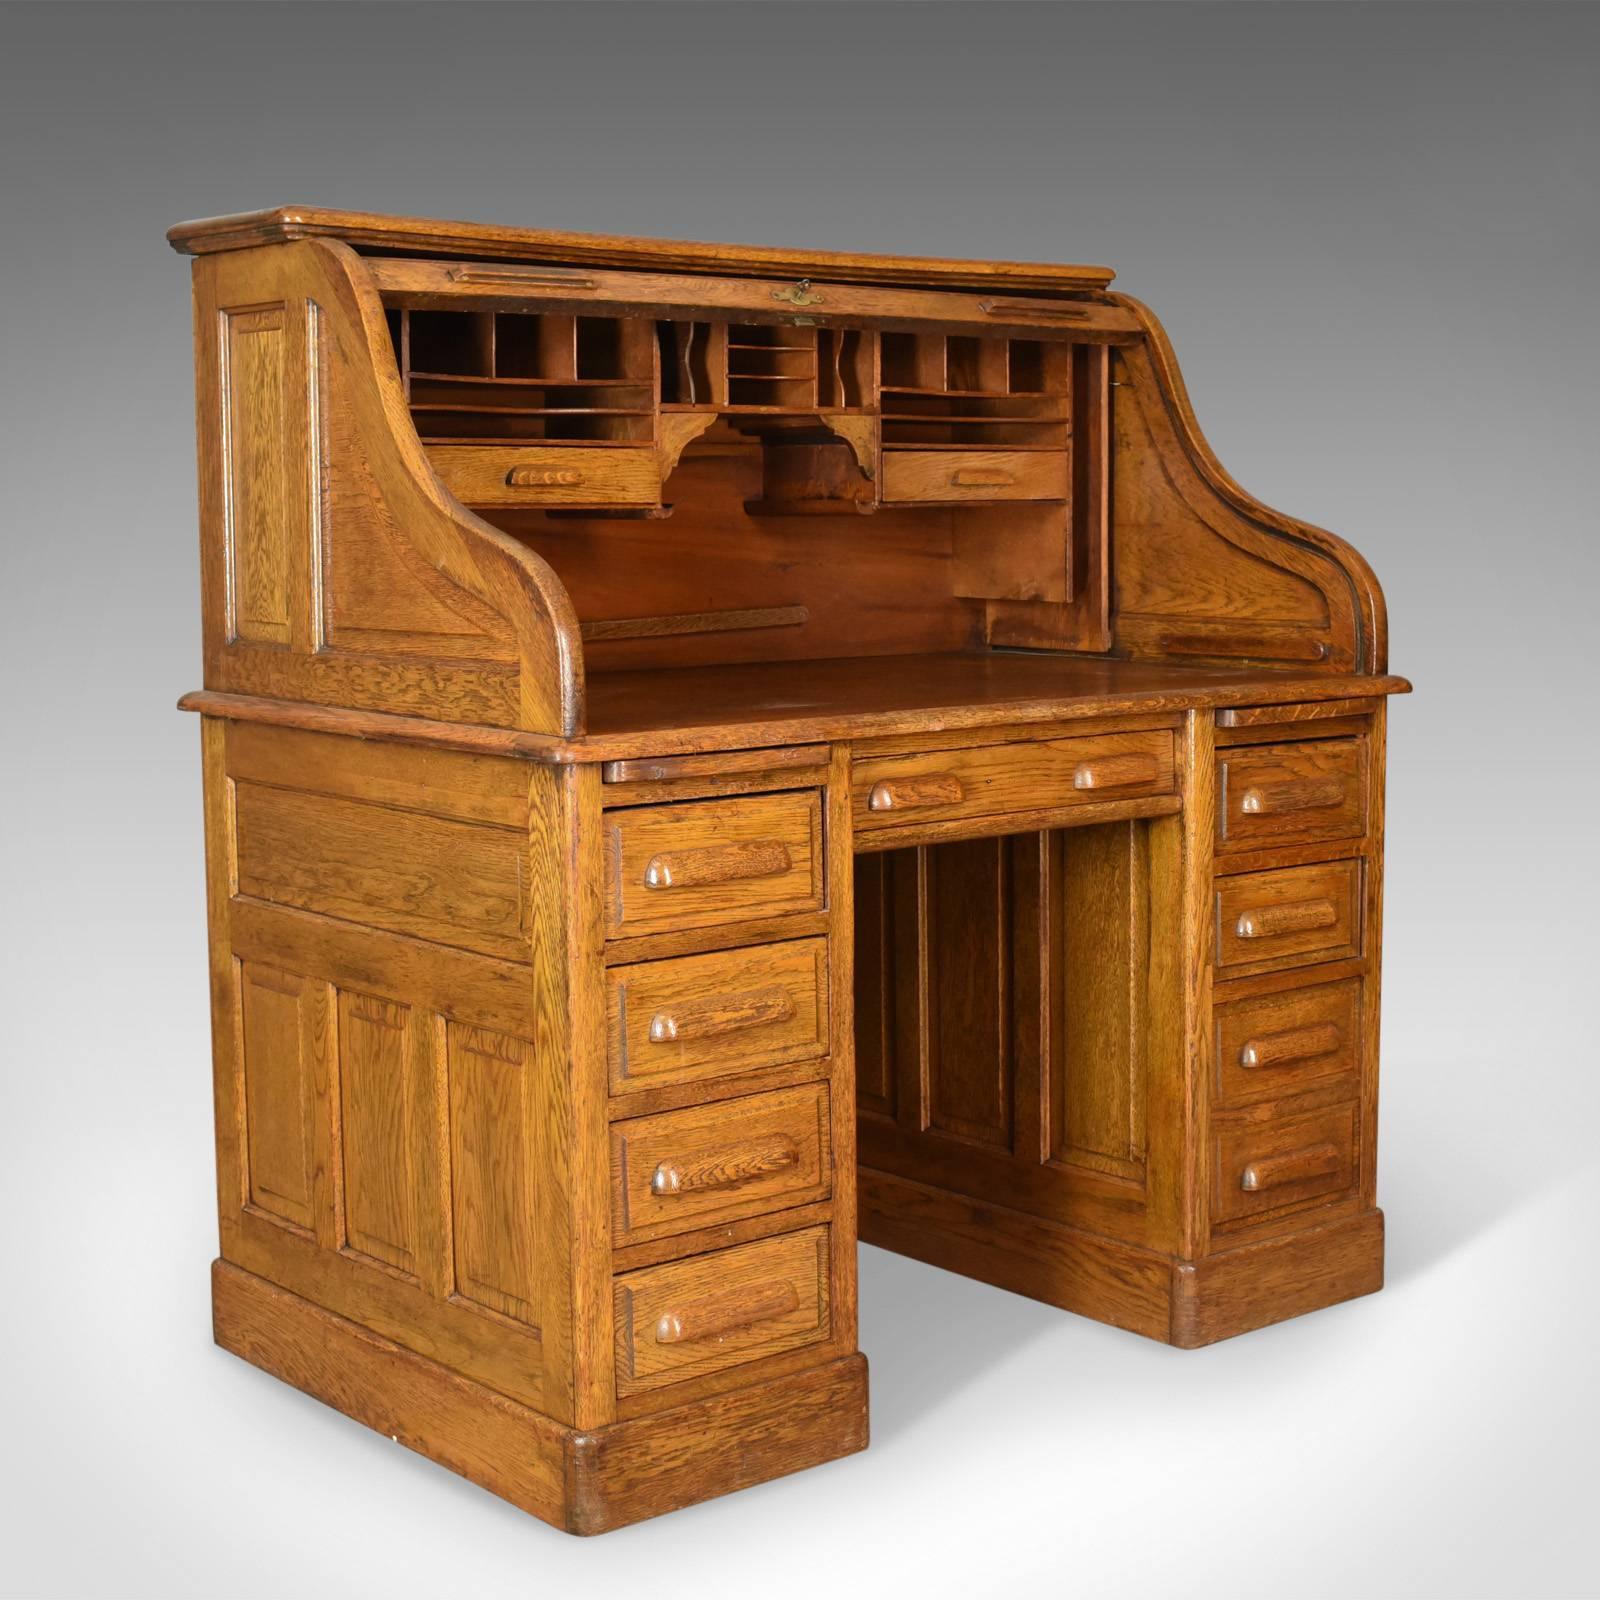 This is an antique roll top desk in English oak, late Victorian with locking tambour front dating to circa 1900.

A fine example with a show back ideal for centre room placement
English oak displaying good consistent colour with a desirable aged